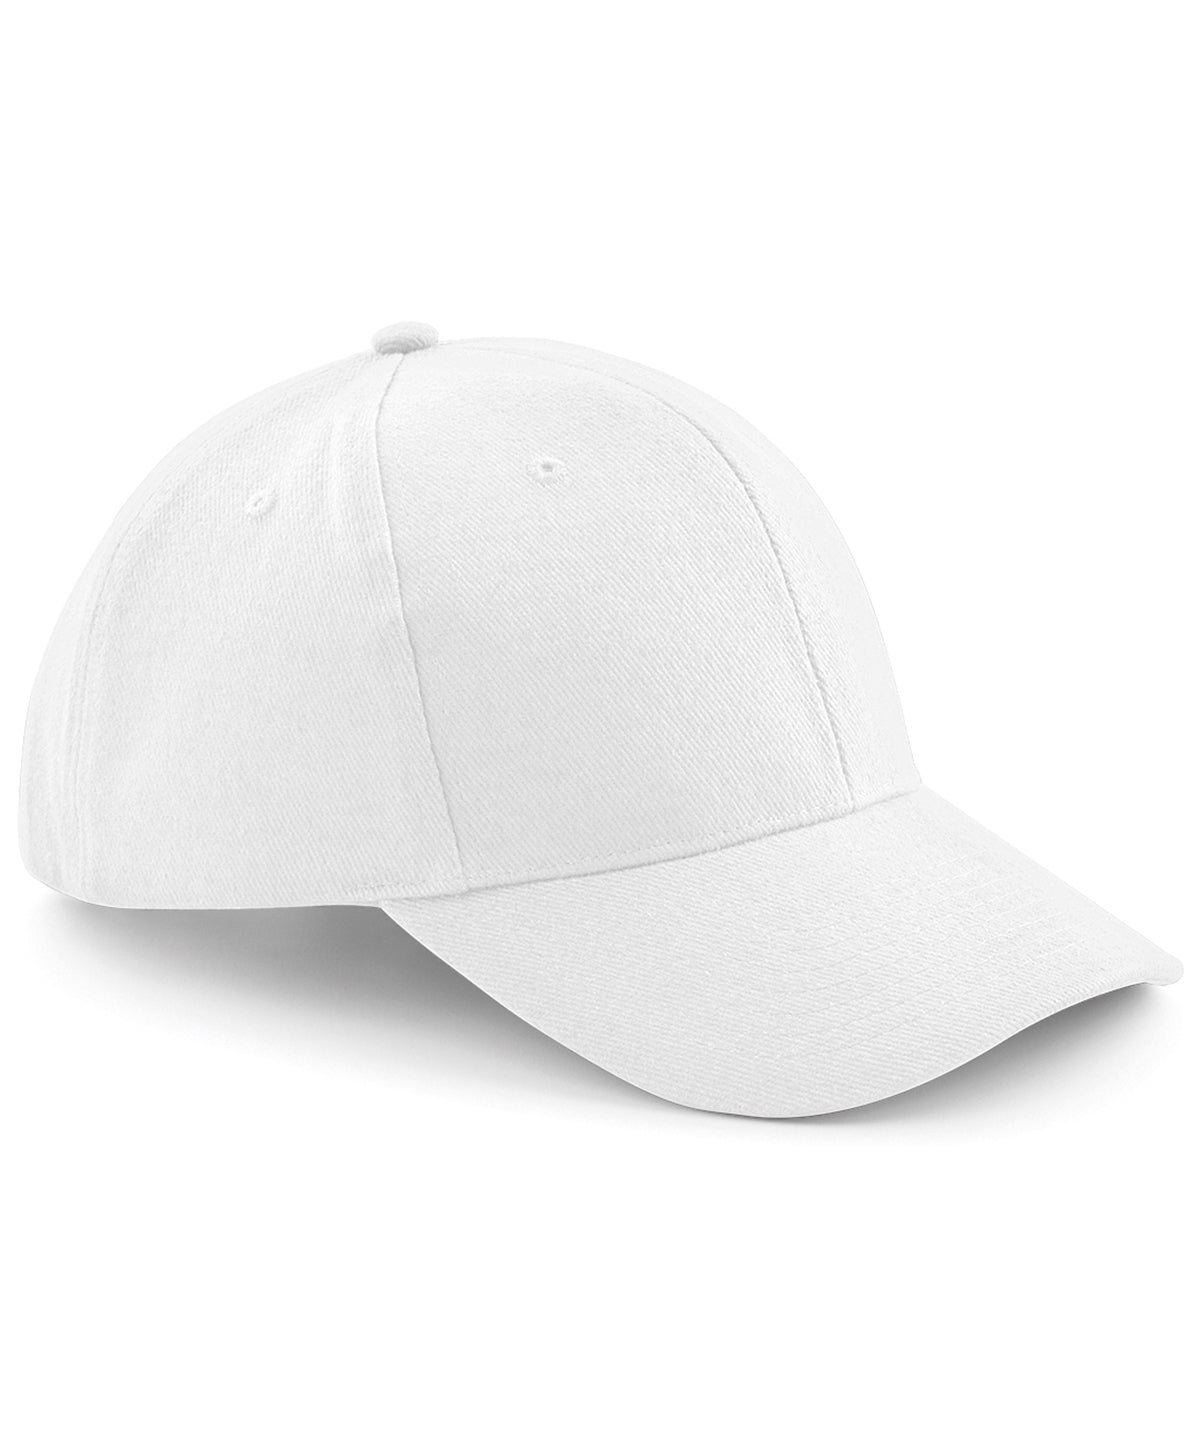 Personalised Caps - White Beechfield Pro-style heavy brushed cotton cap